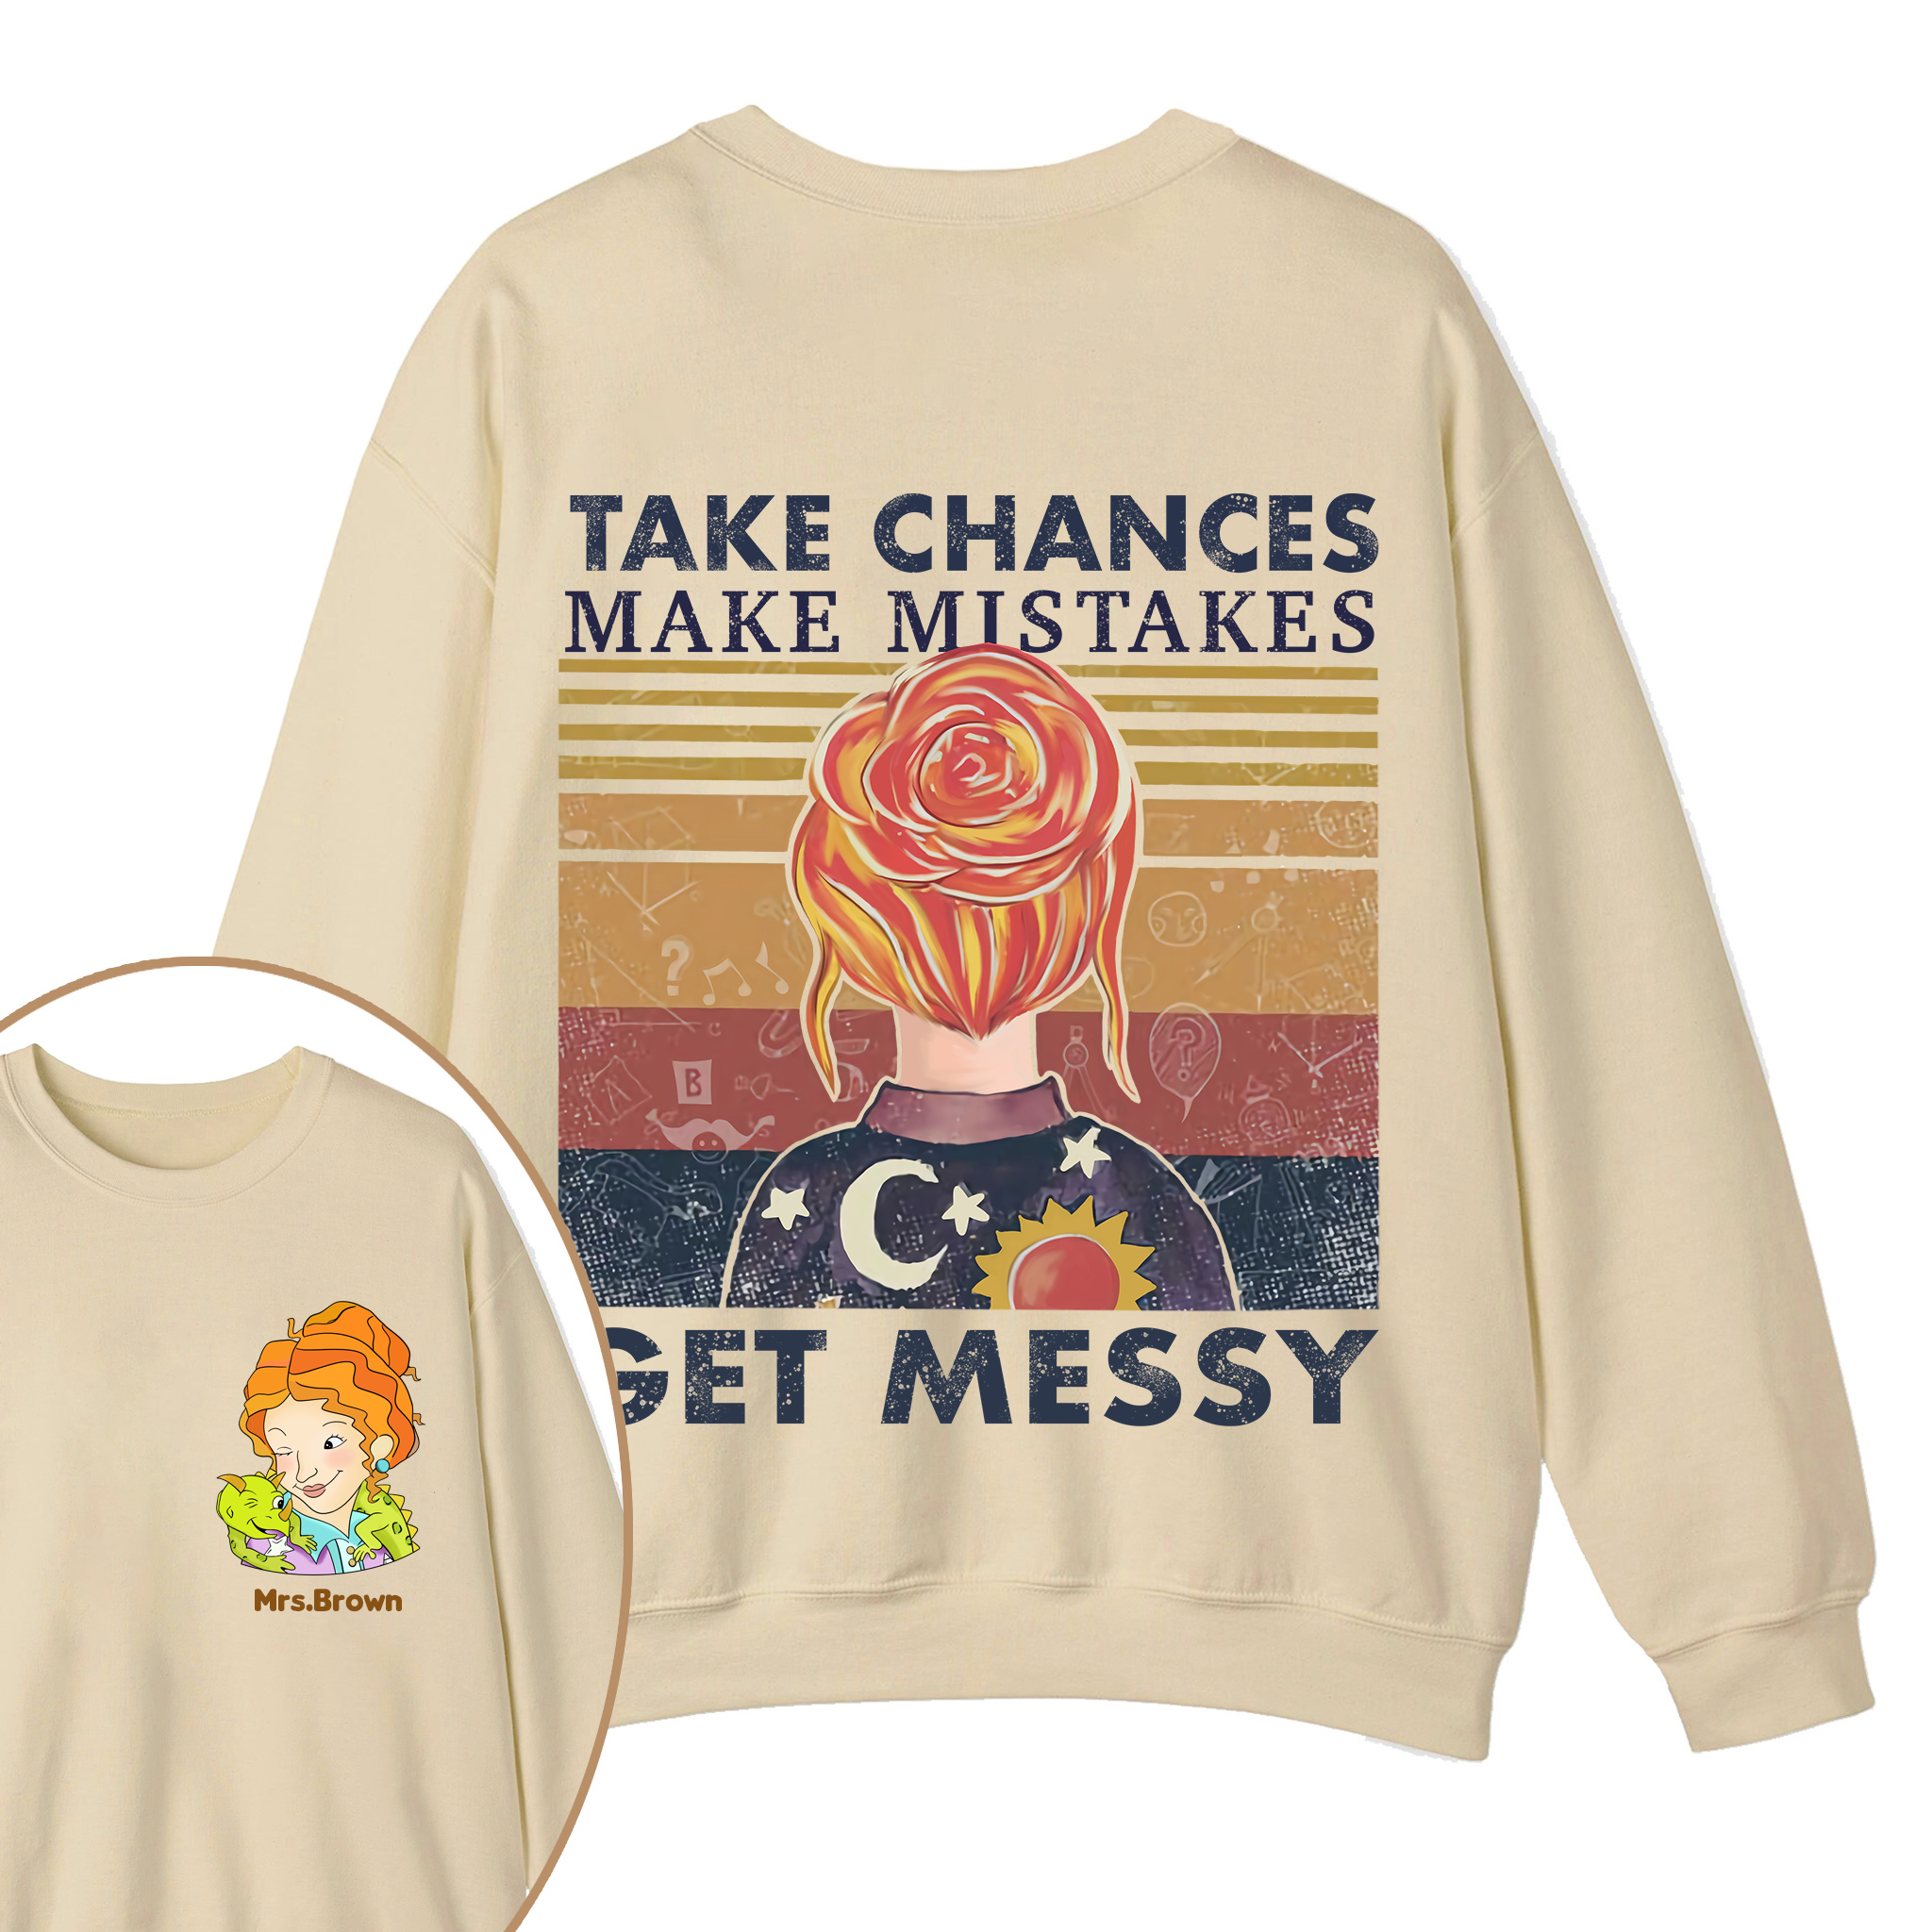 Personalized Name Take Chances Make Mistakes Get Messy Teacher Two Sided Sweatshirt